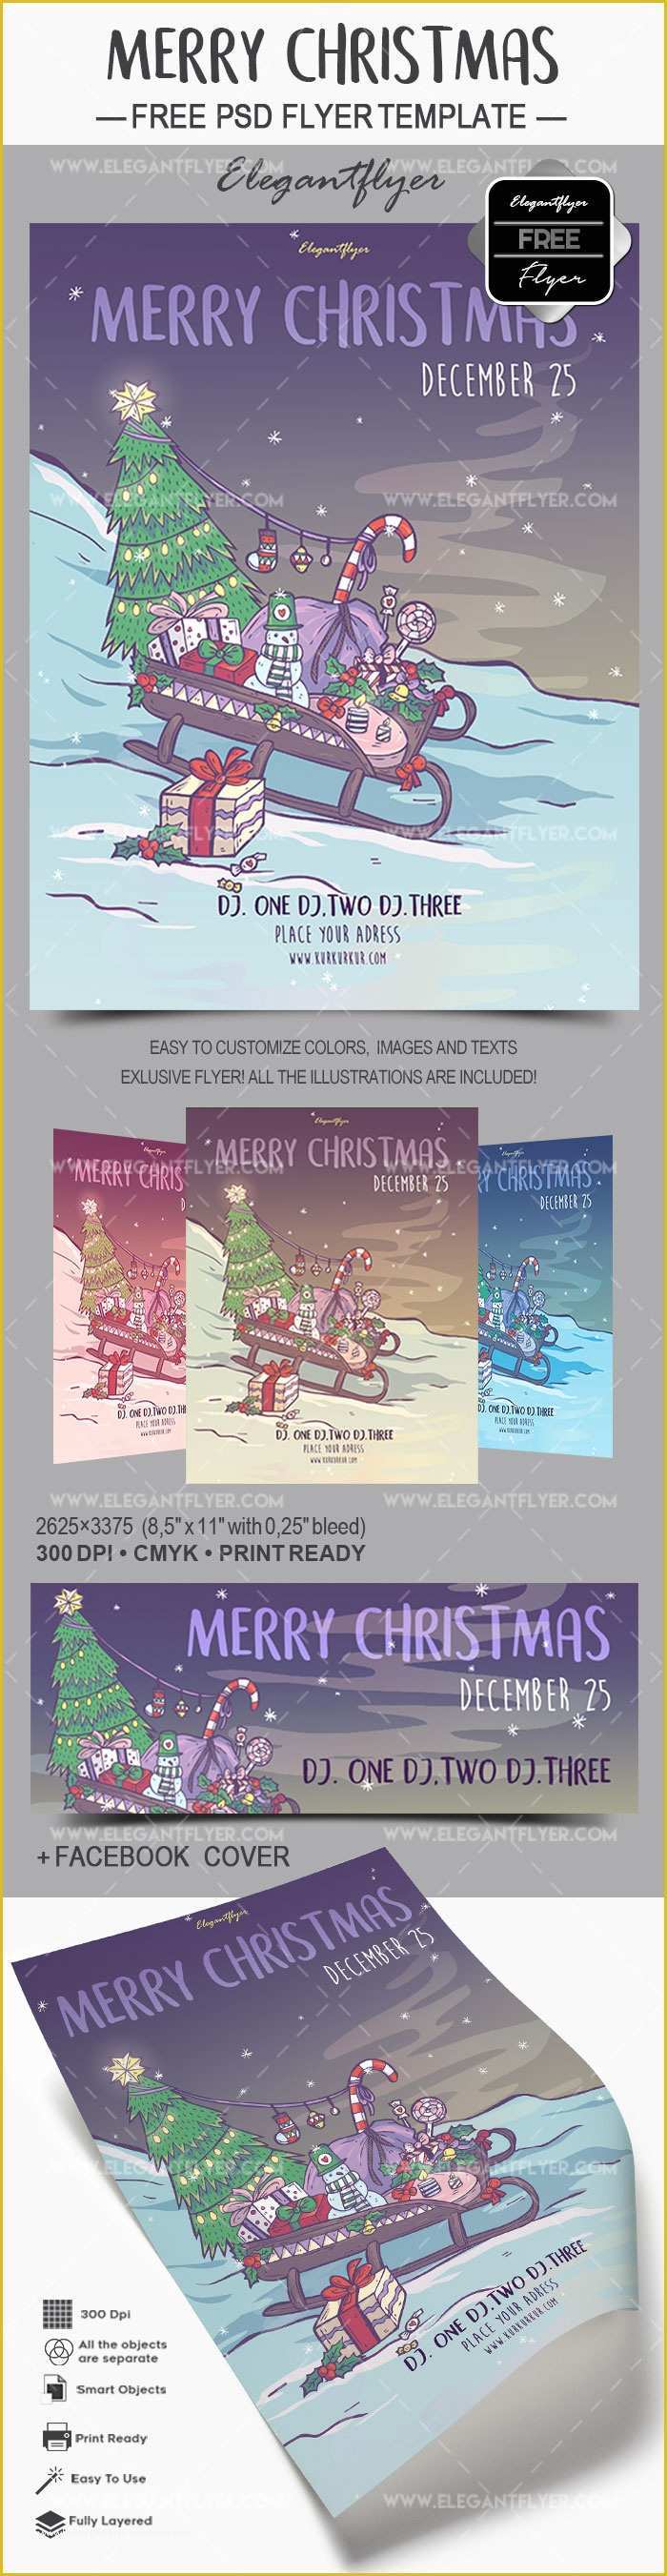 Free Christmas Flyer Design Templates Of Merry Christmas – Free Flyer Psd Template – by Elegantflyer